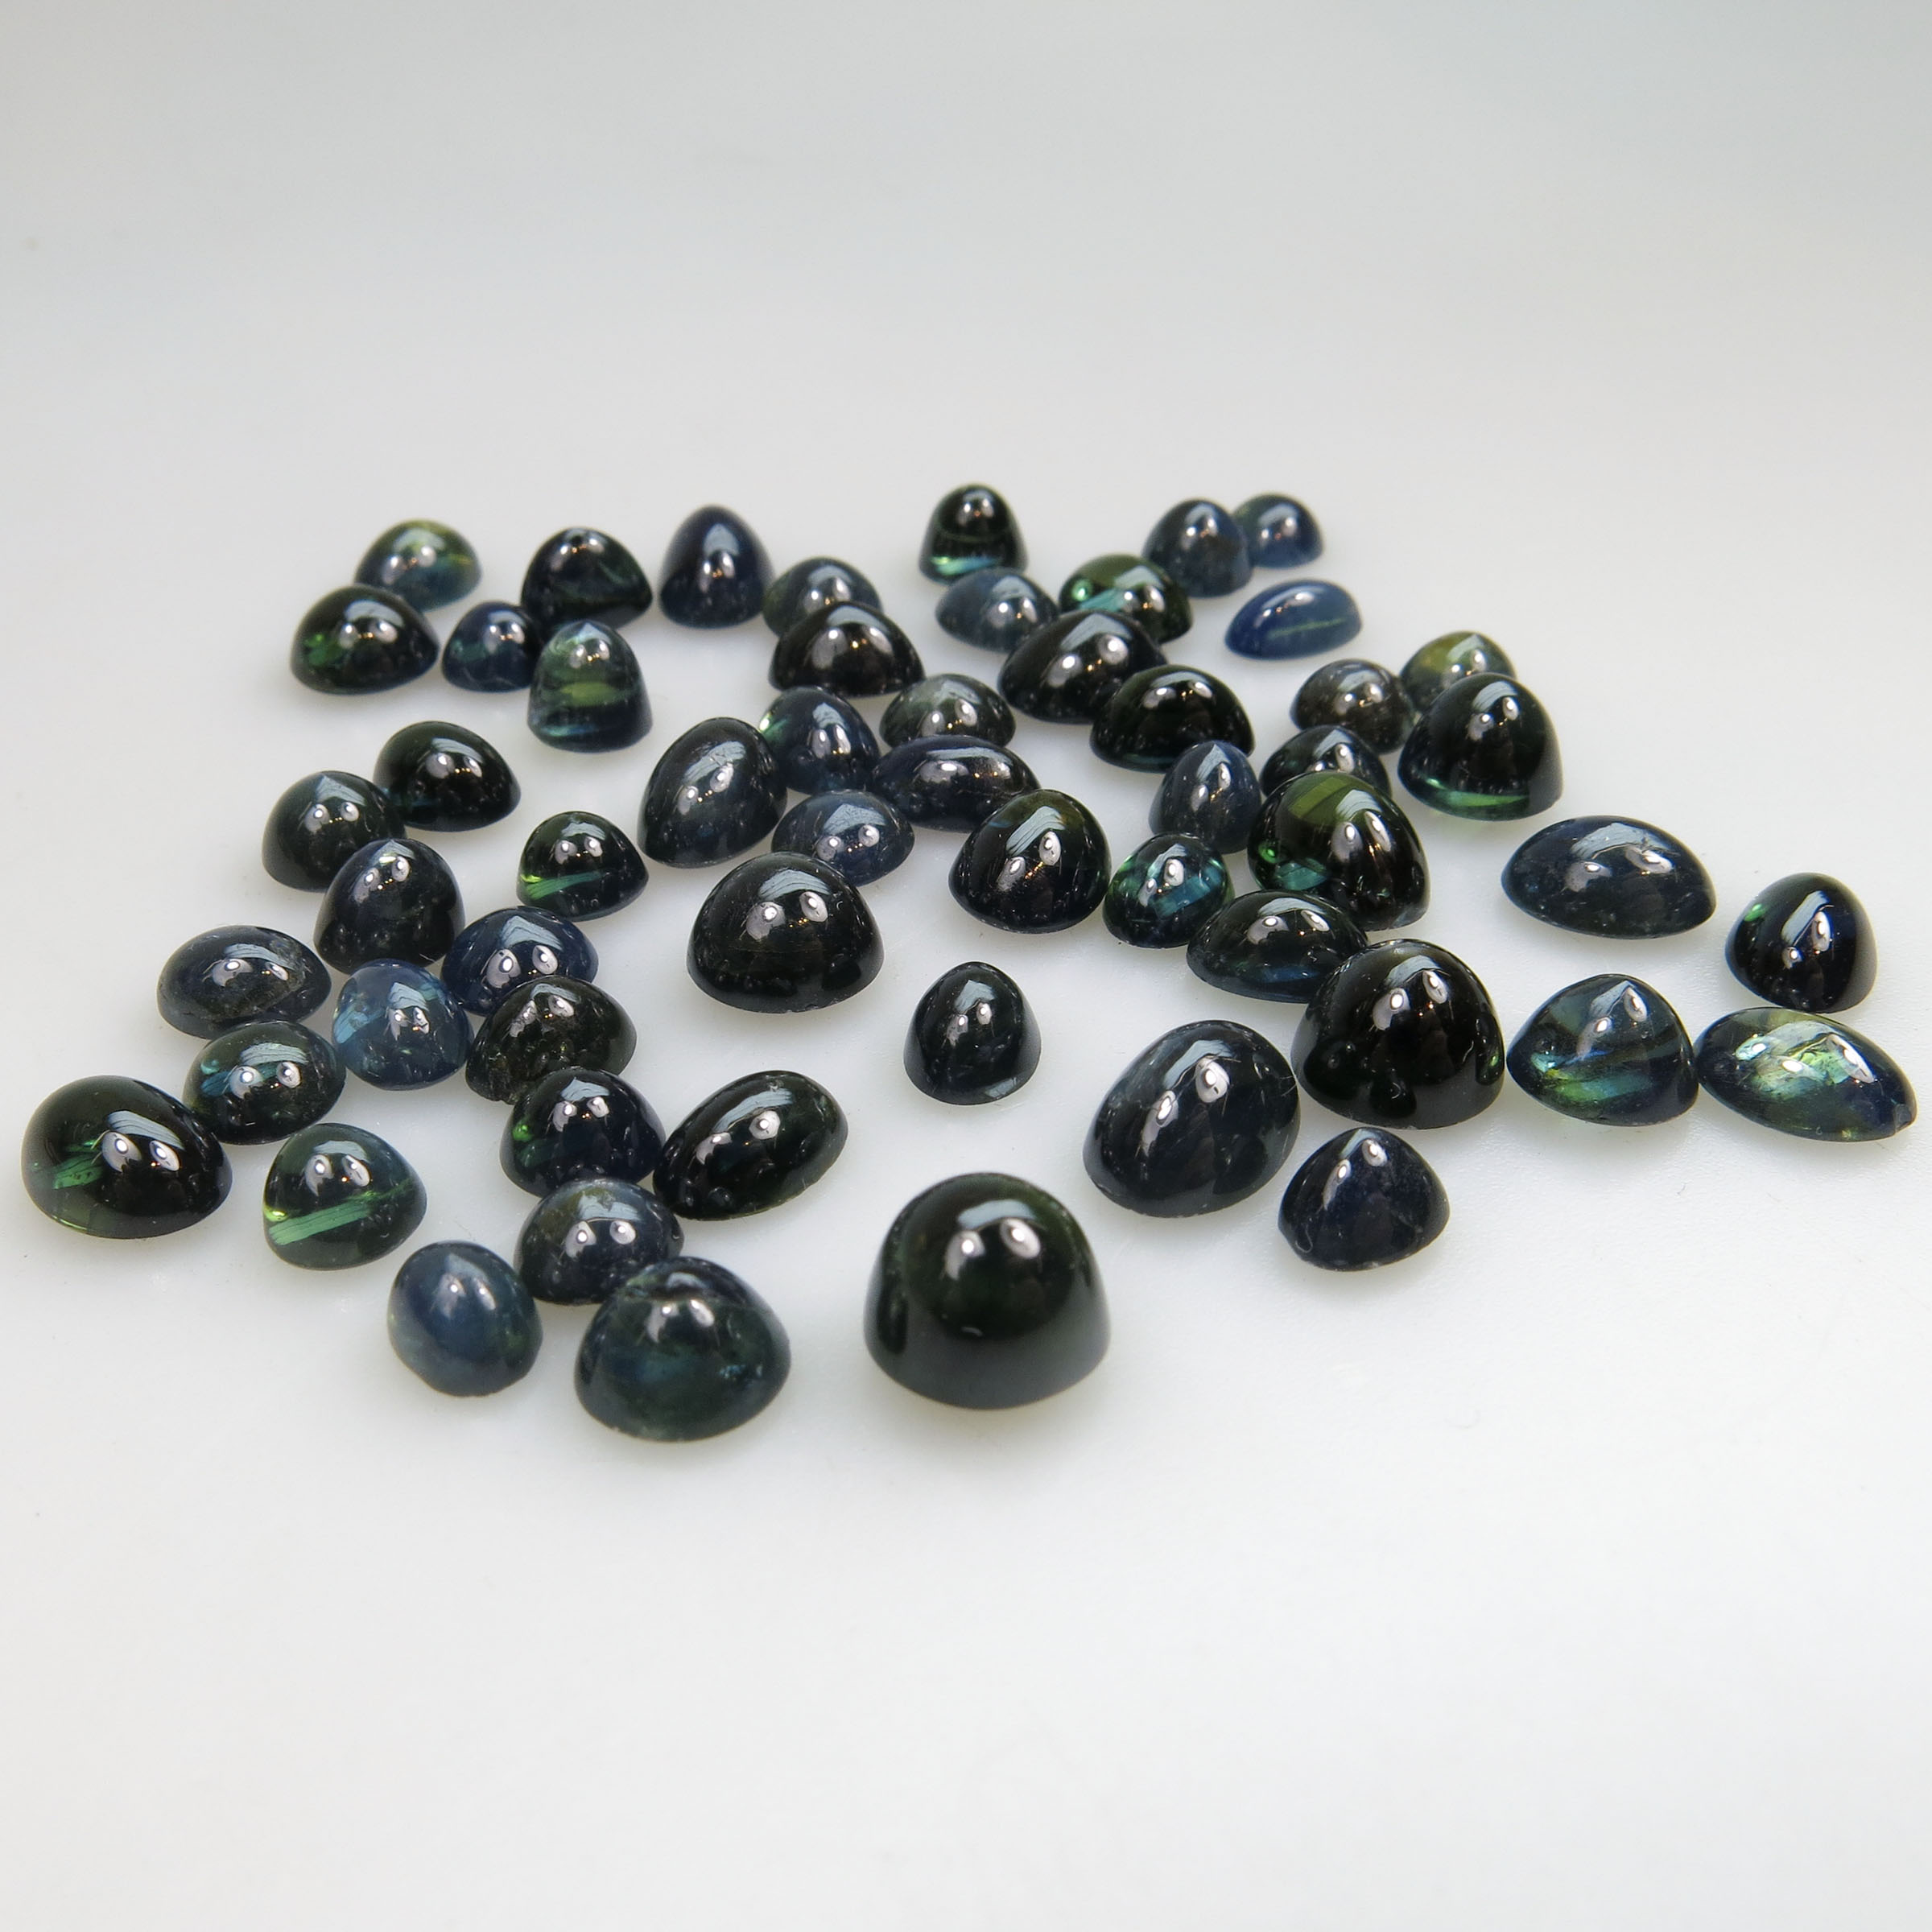 56 Circular And Oval Sapphire Cabochons